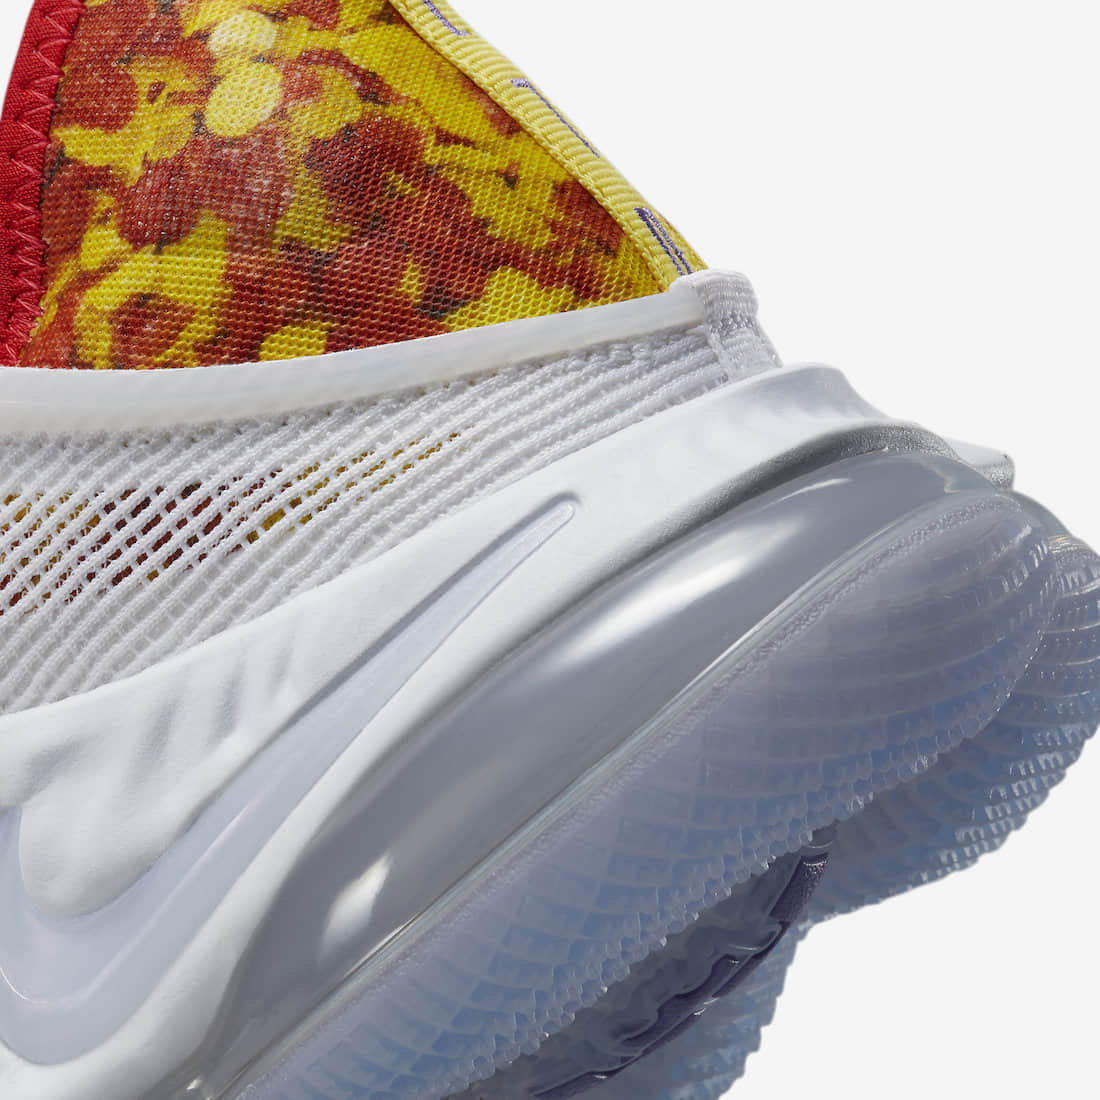 Nike LeBron 19 Low 'Magic Fruity Pebbles' - Limited Edition DQ8344-100